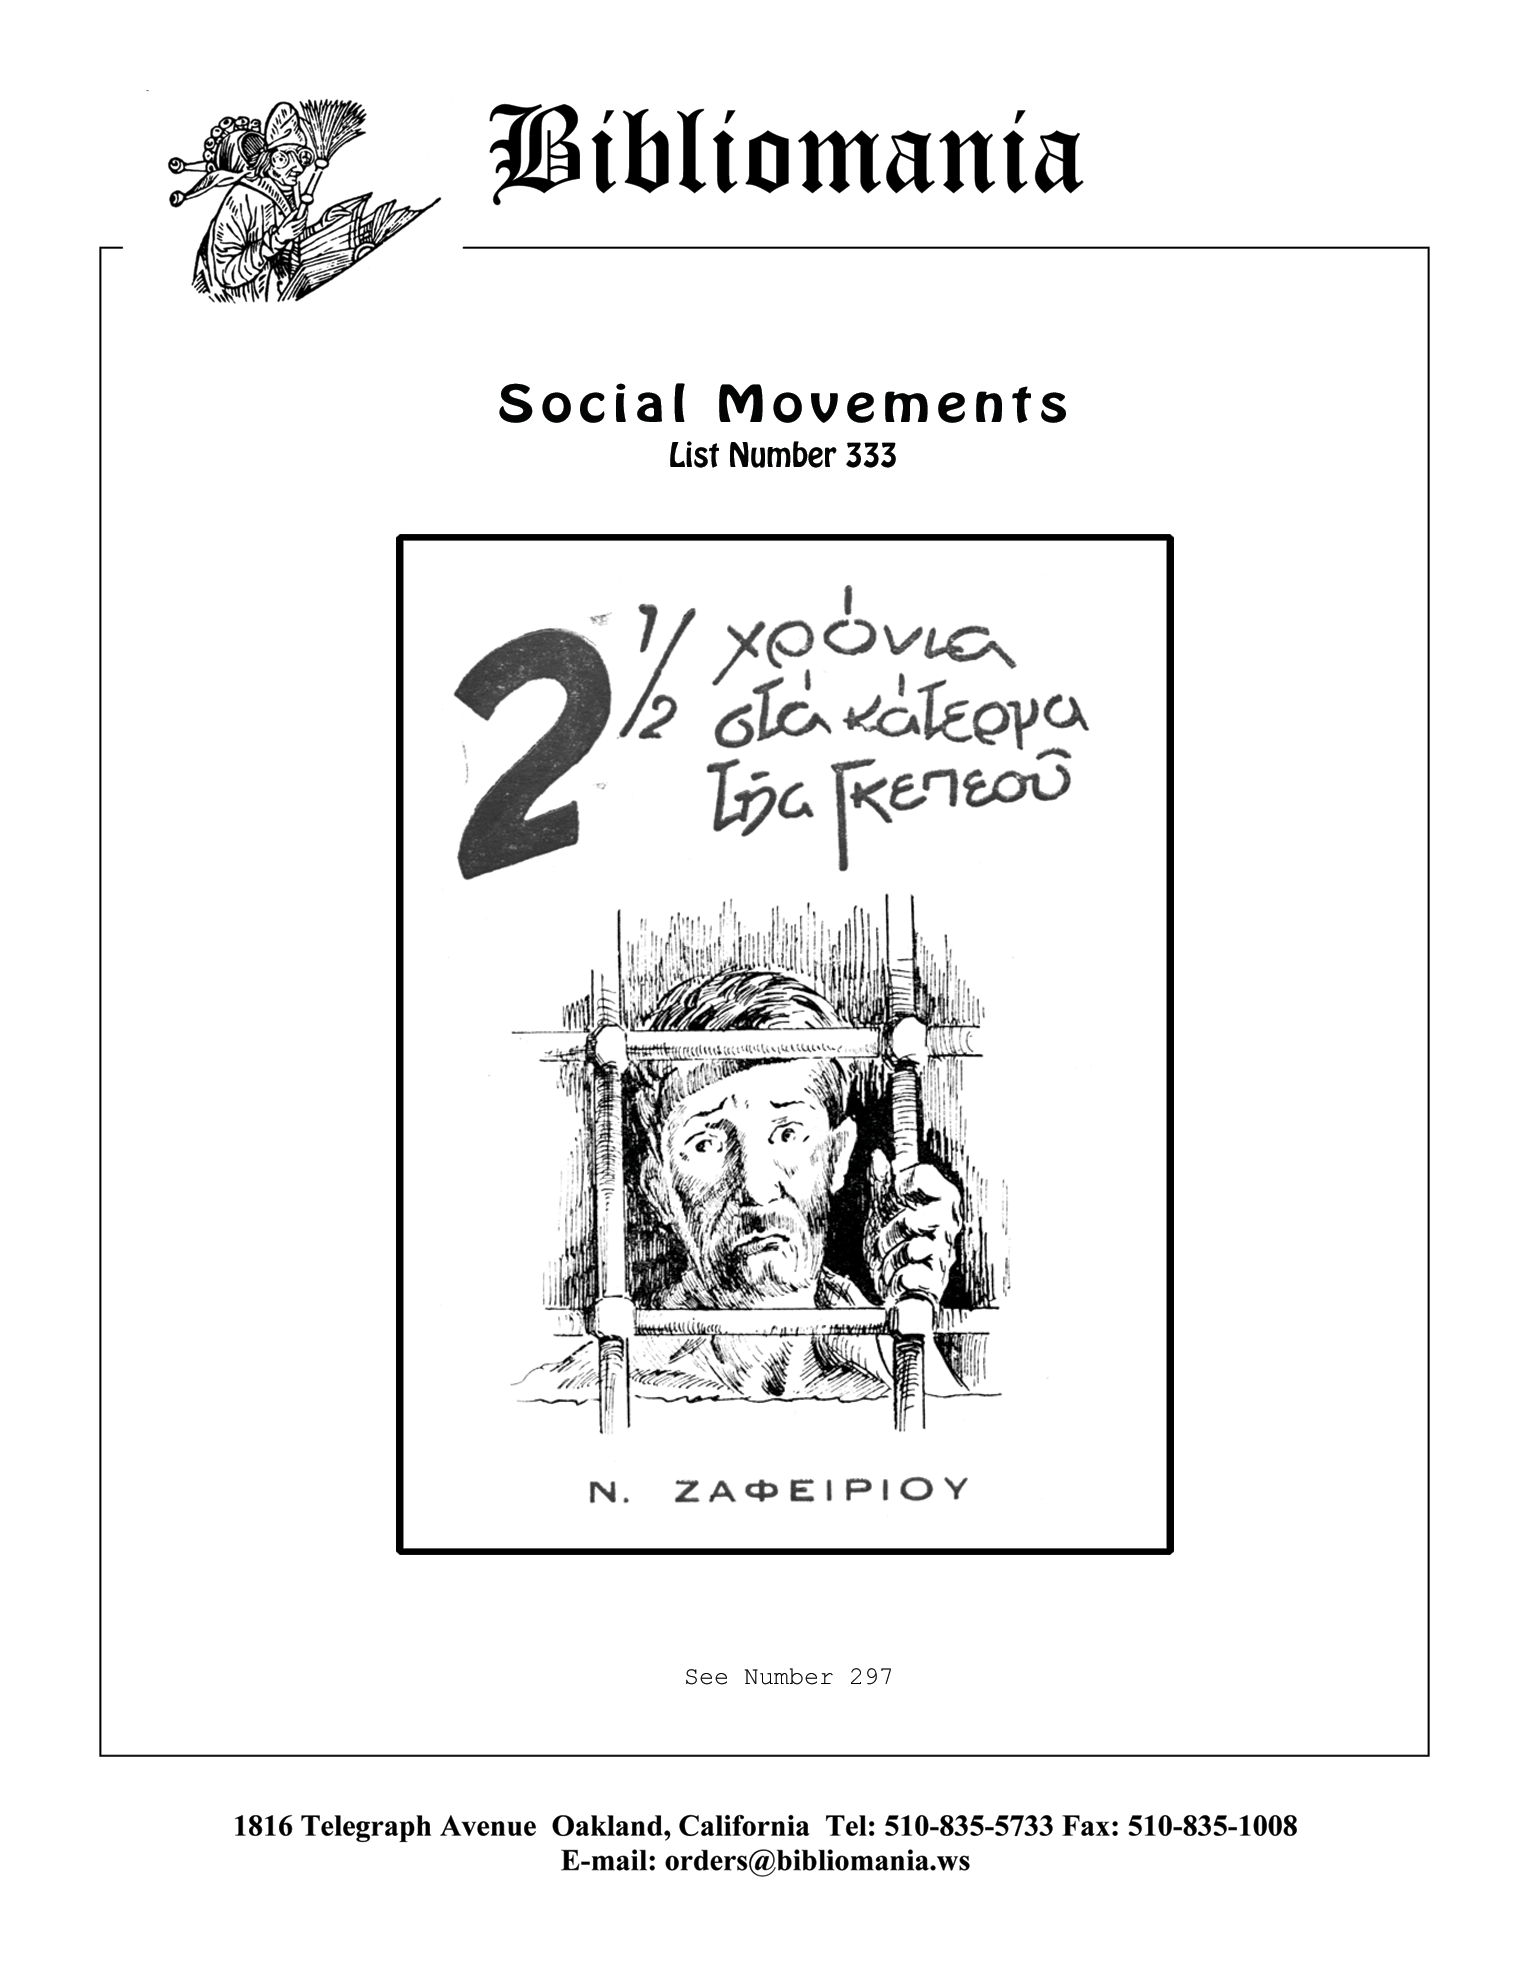 List Number 333 Social Movements